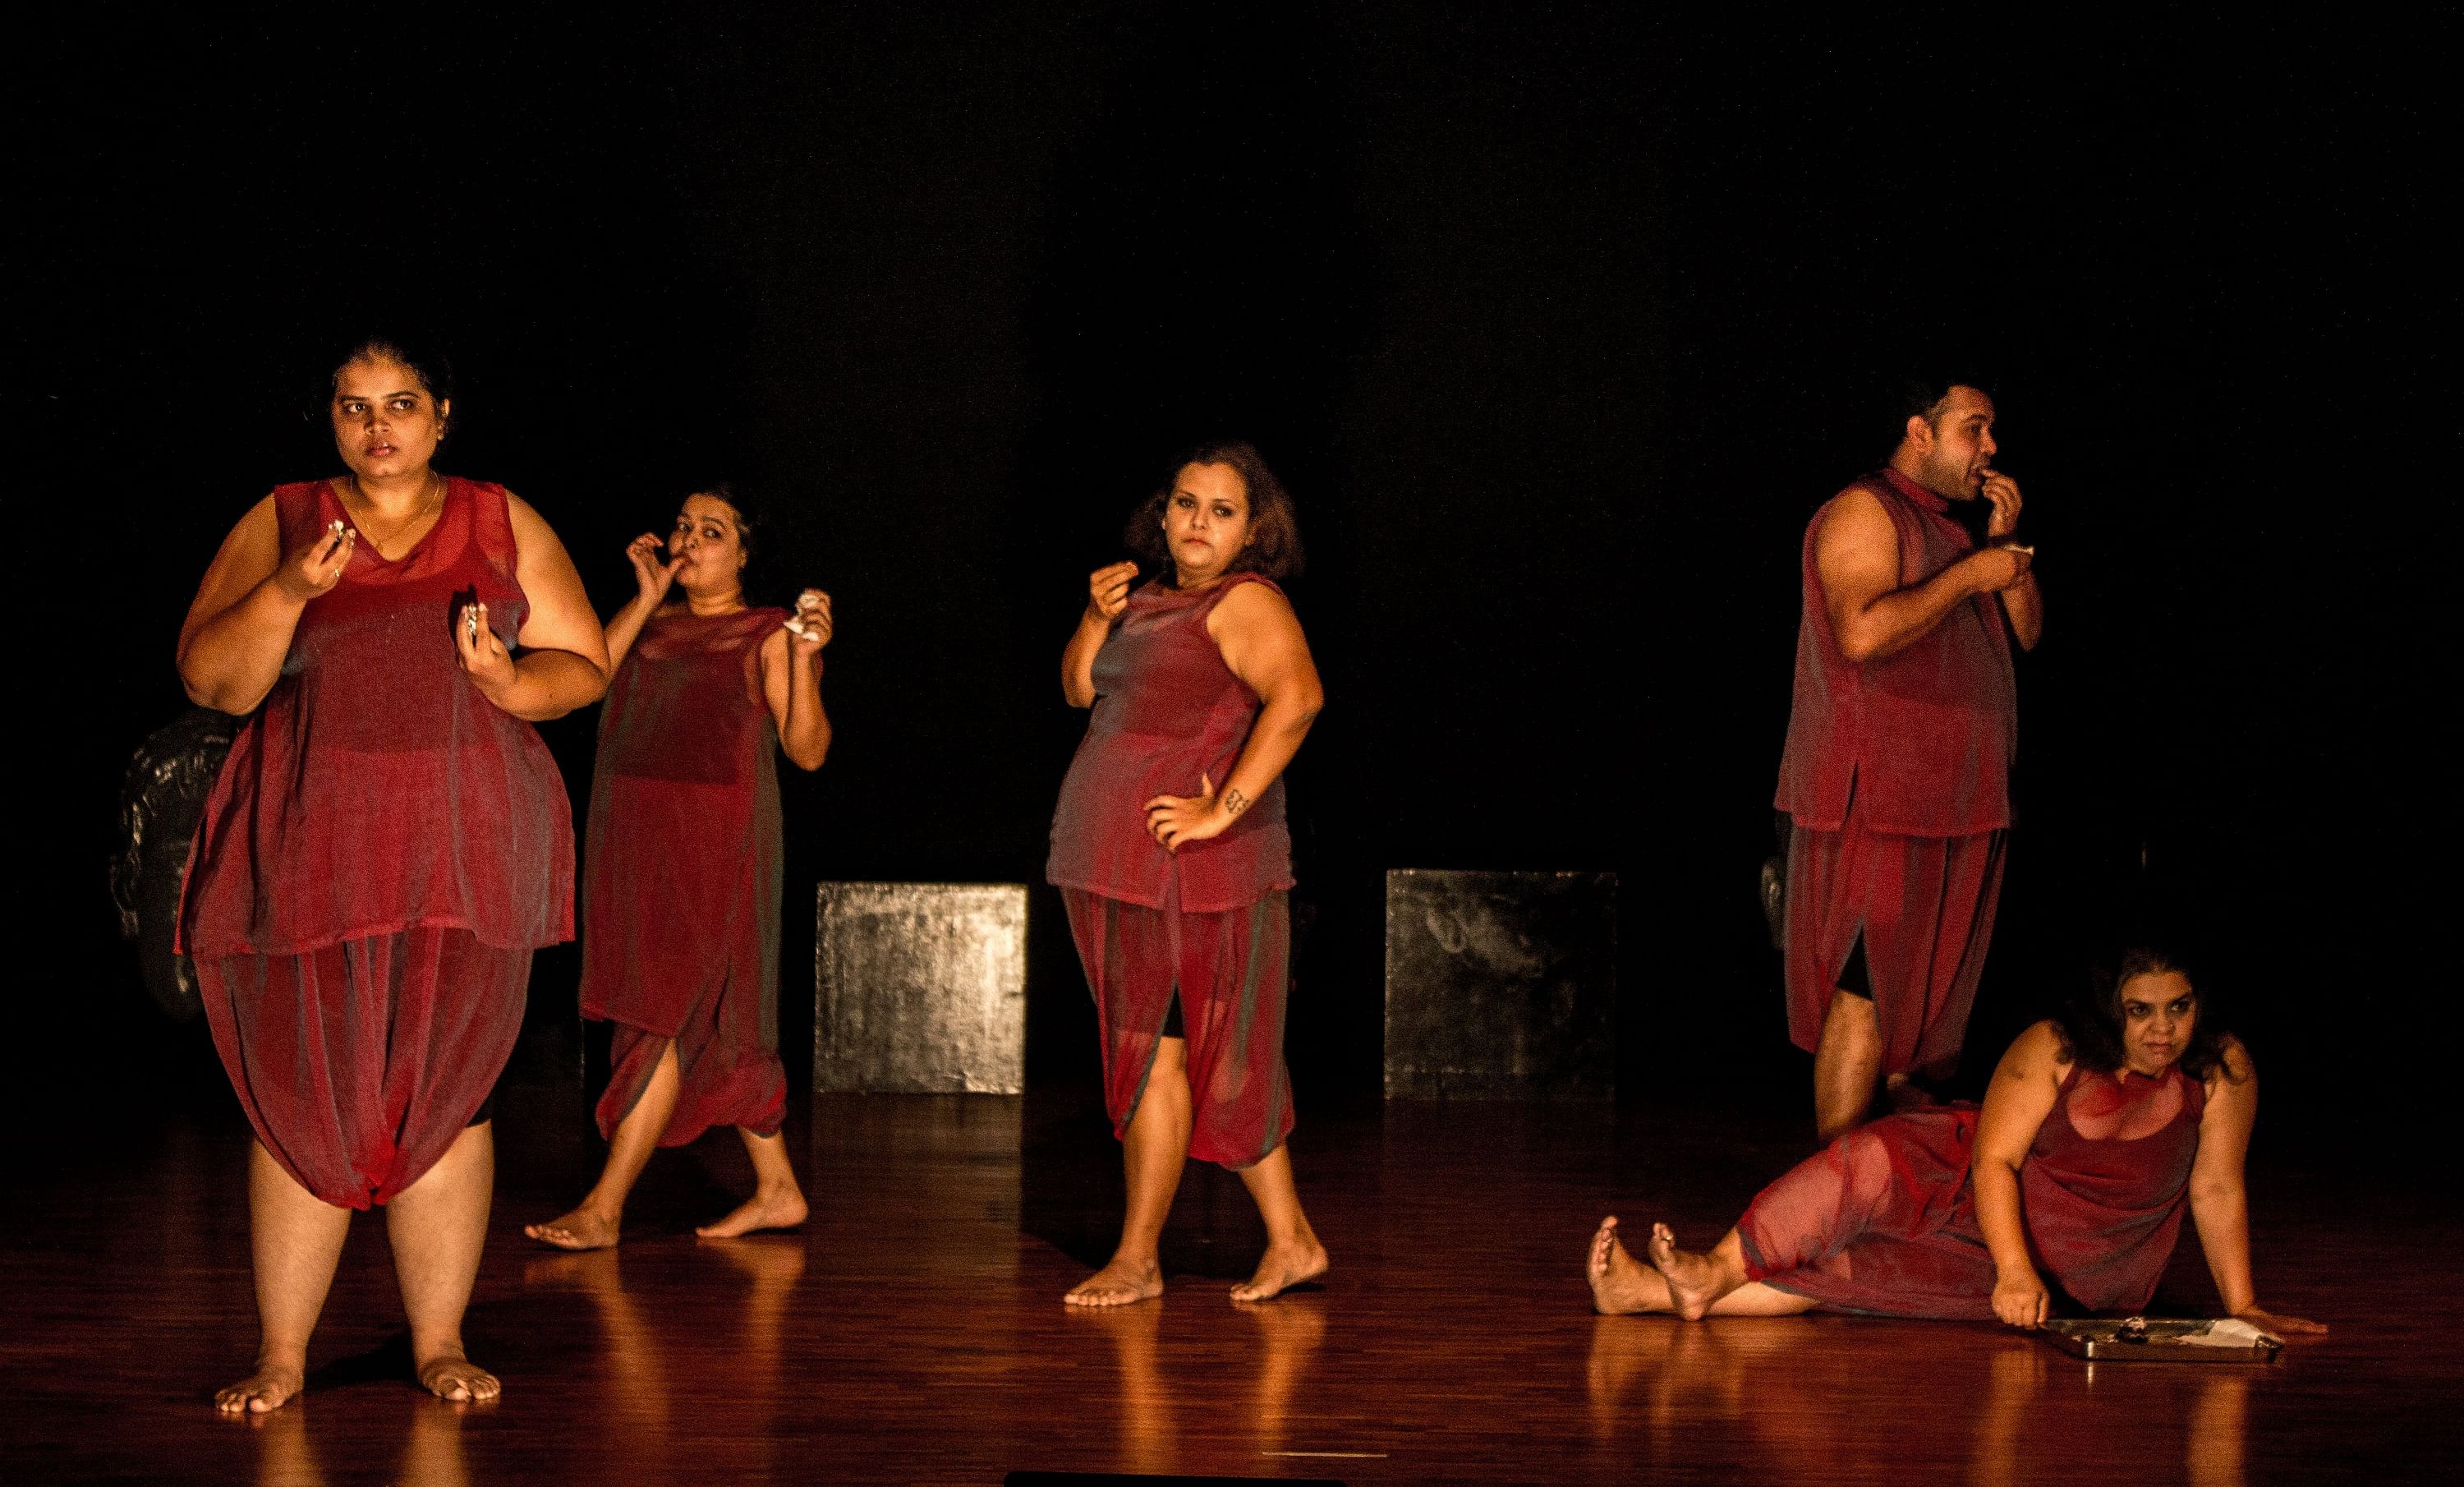 Bengaluru-based theatre troupe ‘The Big Fat Company’ challenges stereotypes based on appearance.